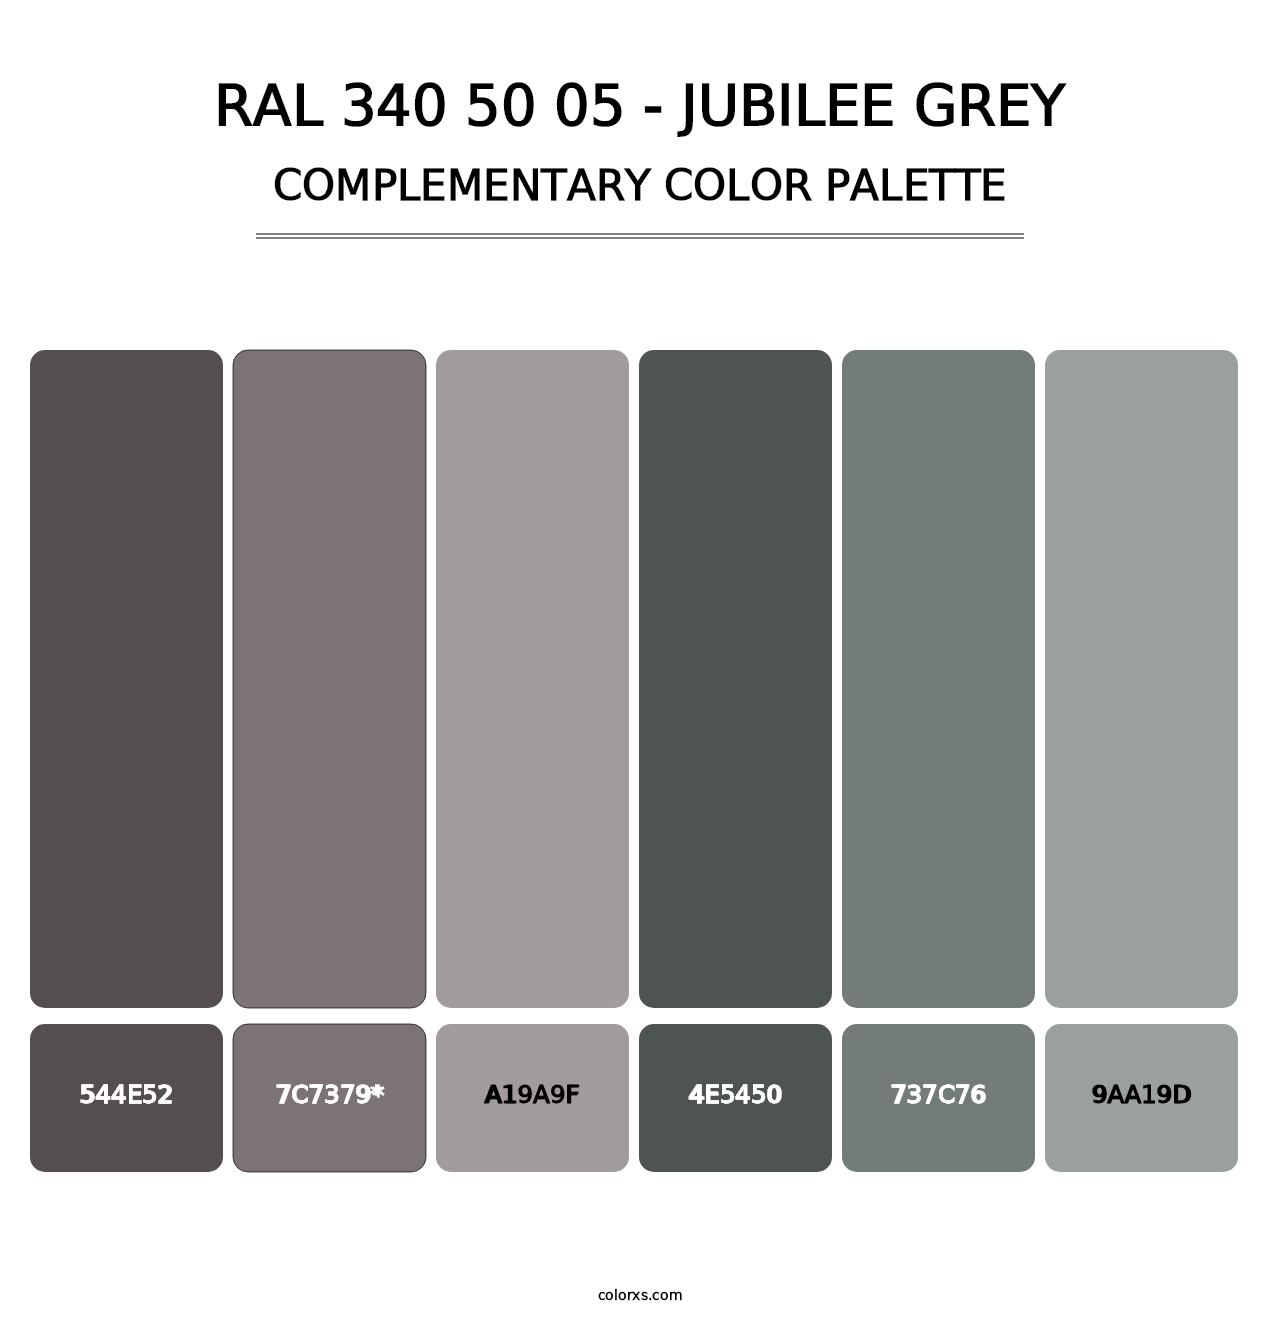 RAL 340 50 05 - Jubilee Grey - Complementary Color Palette